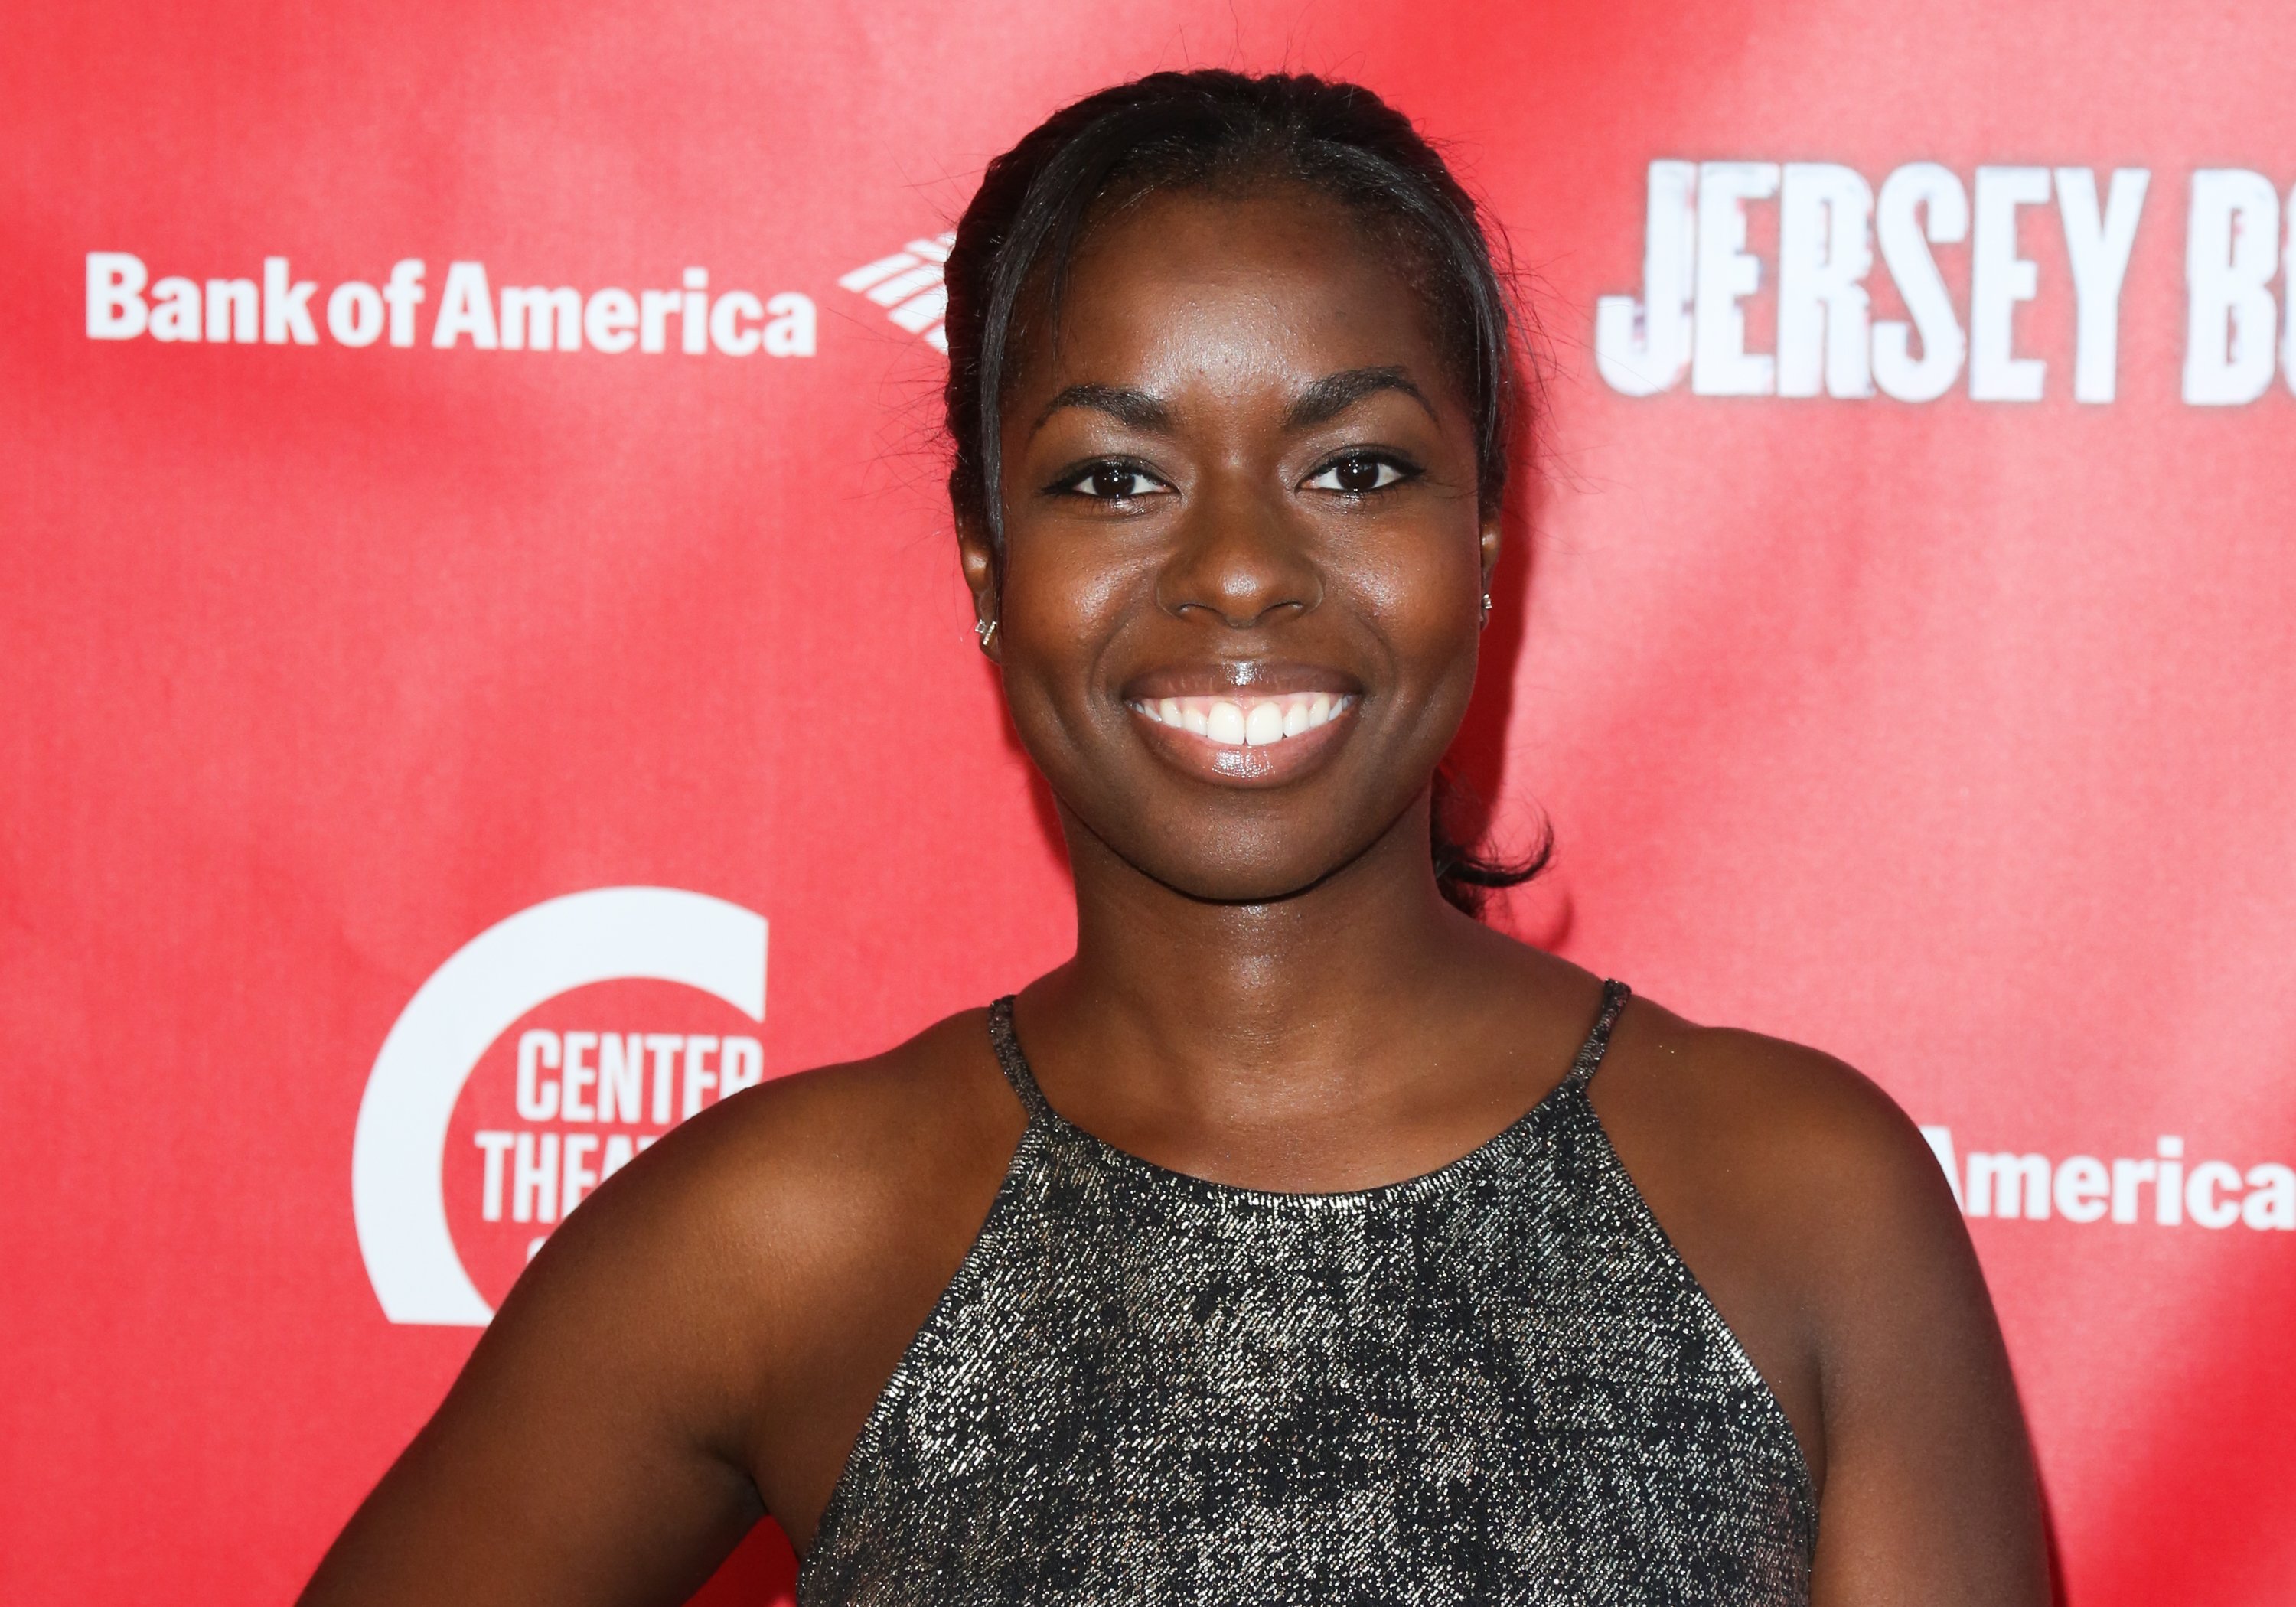 Camille Winbush pictured at the opening night of "Jersey Boys" at the Ahmanson Theatre on May 18, 2017 in Los Angeles, California. | Source: Getty Images